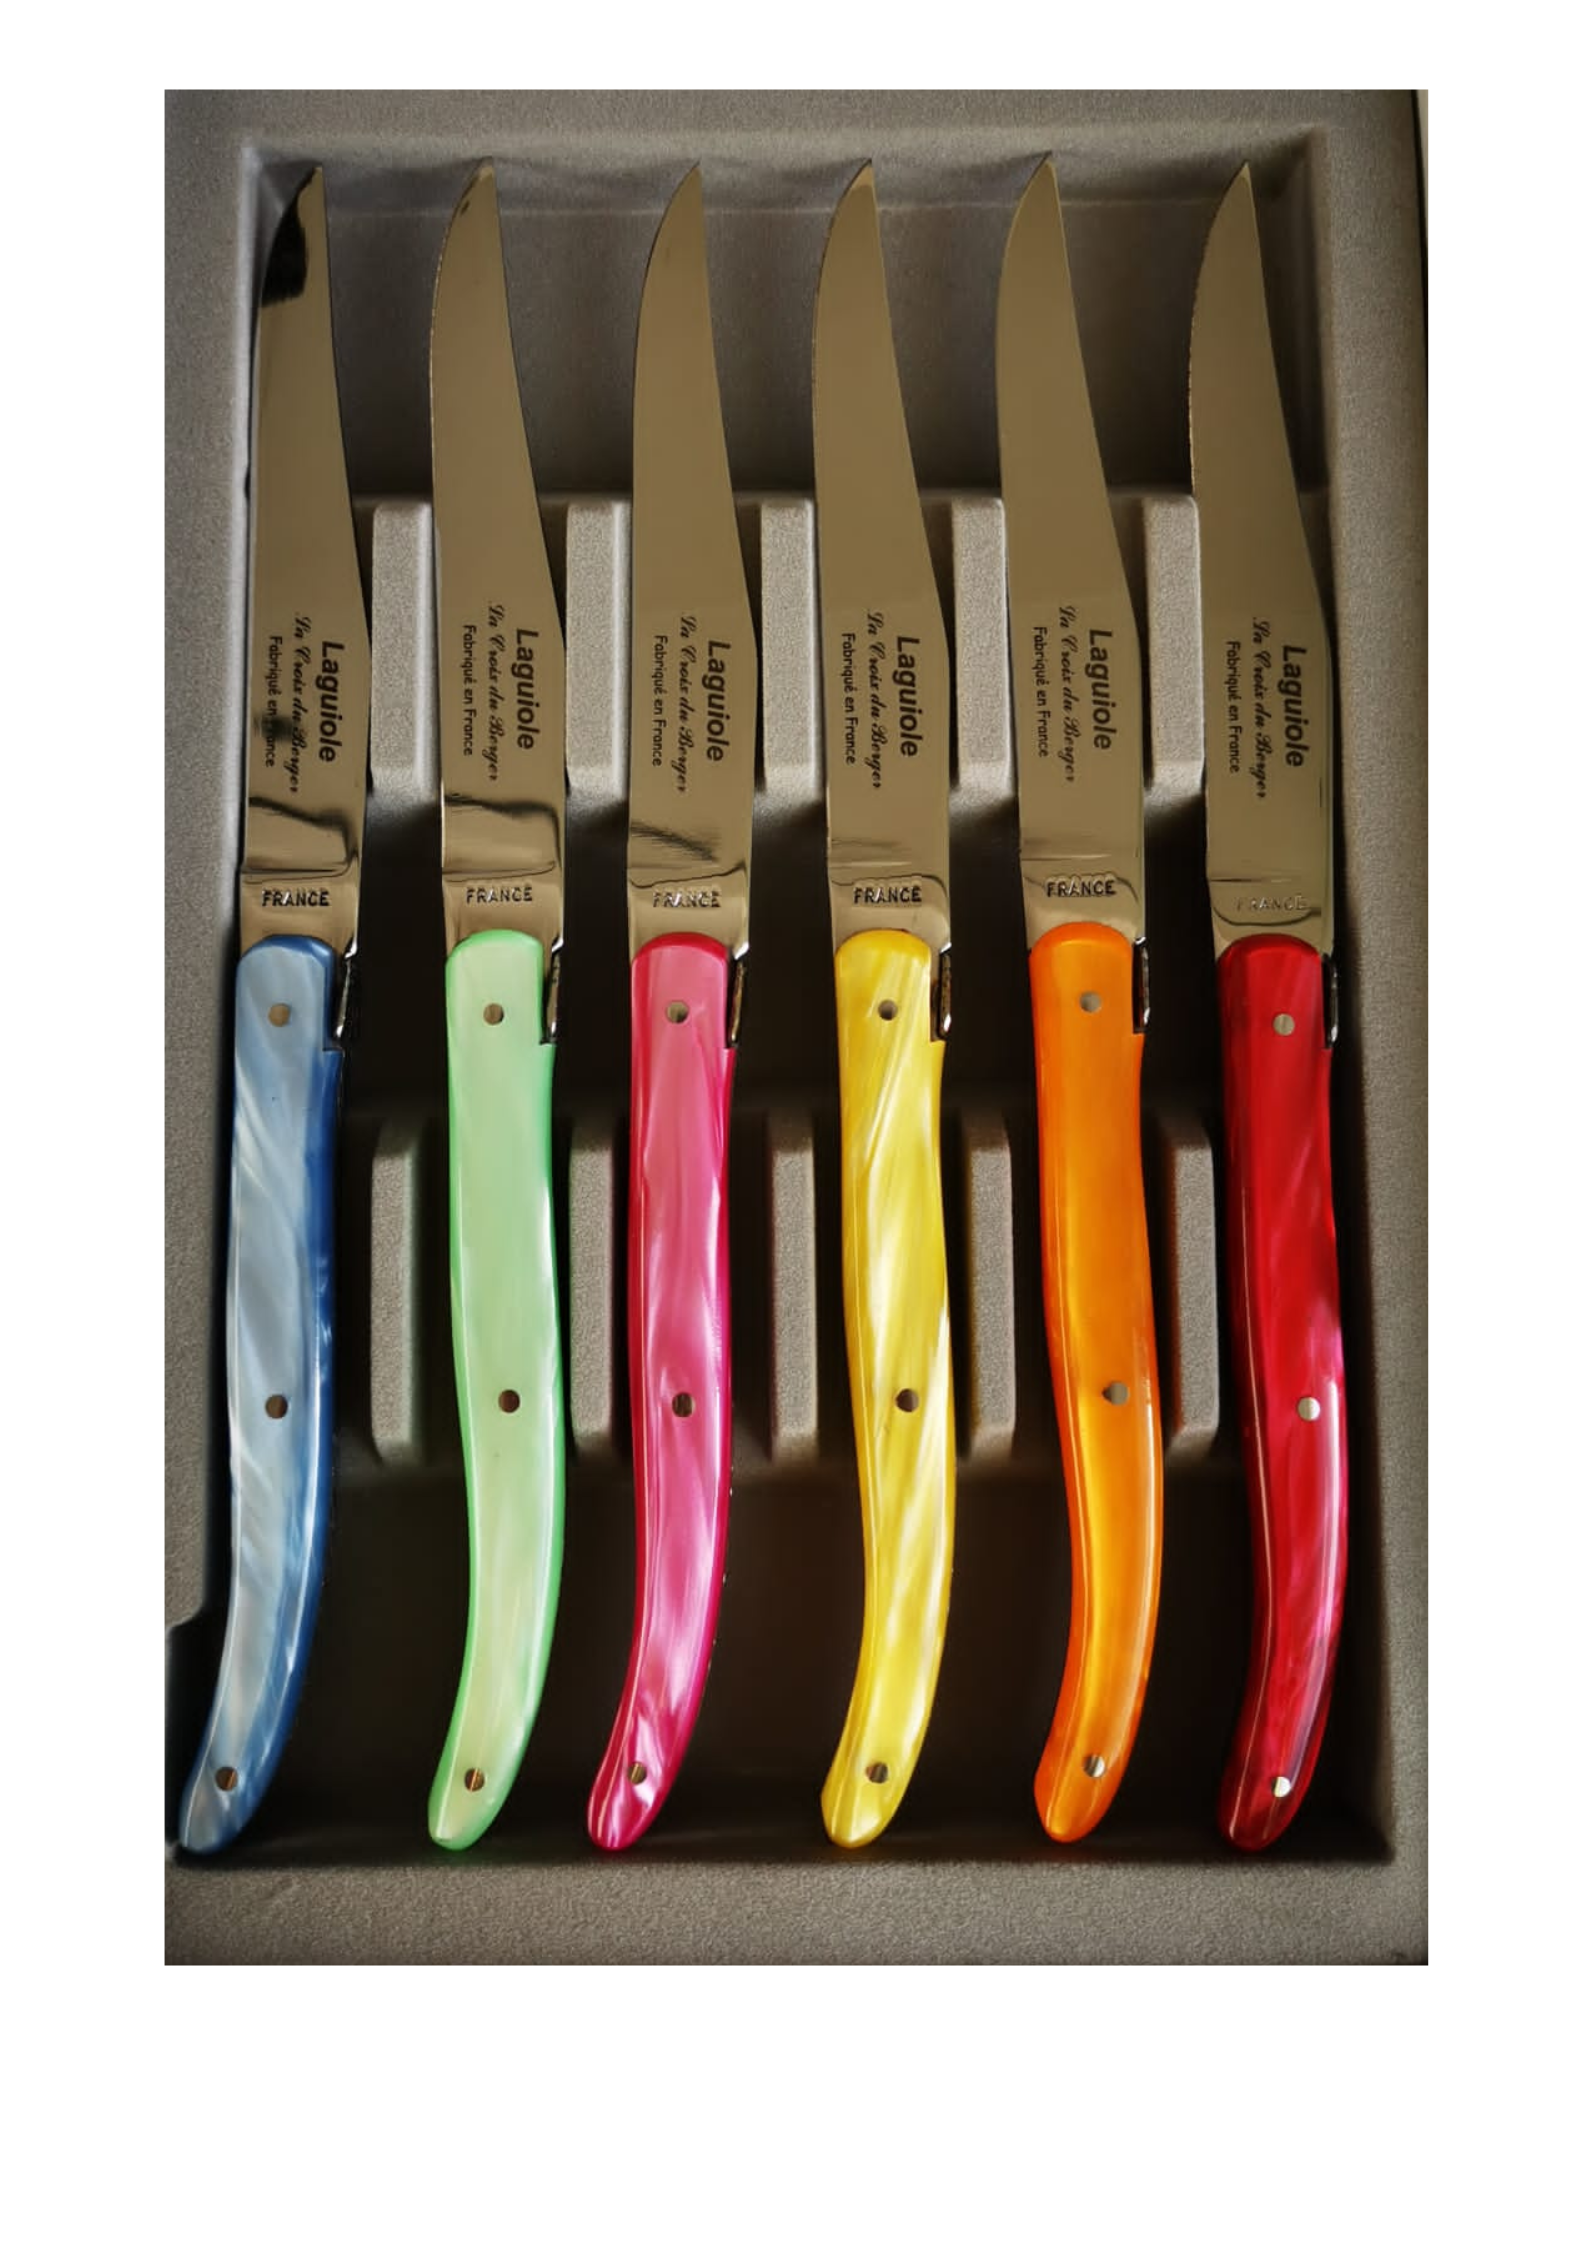 Laguiole French Stainless Steel knives set of 6 - La Maisonnette